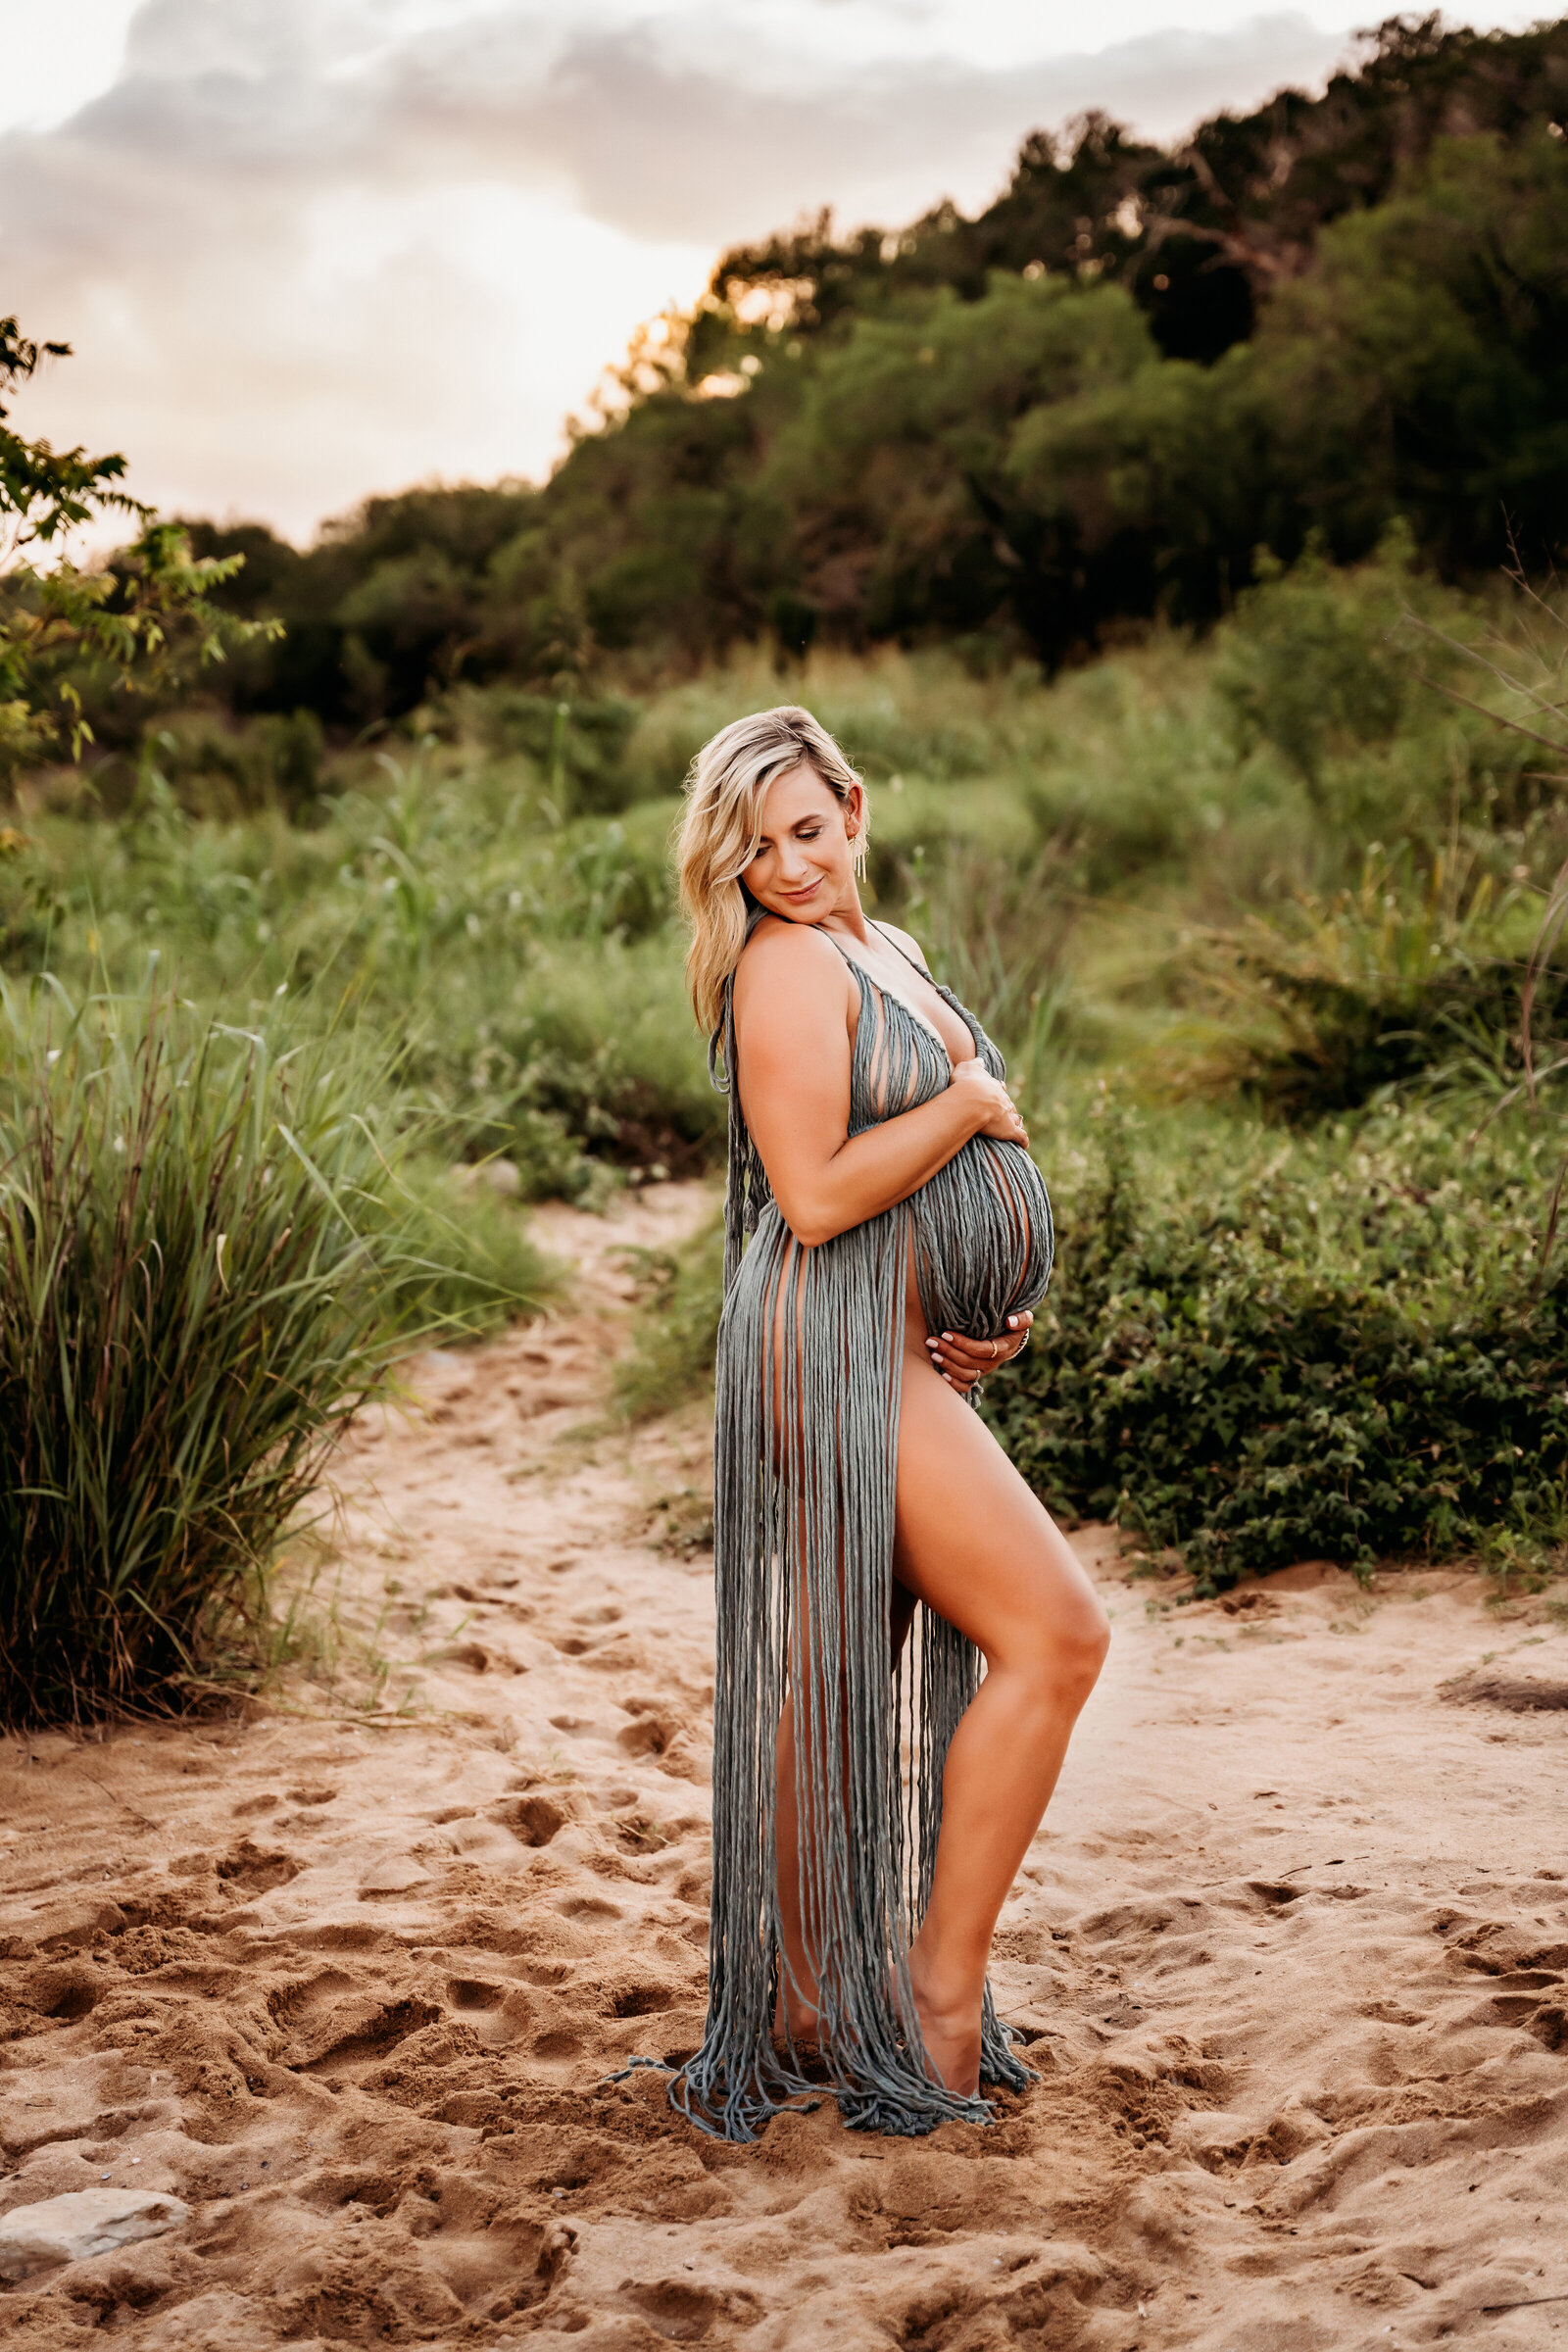 Maternity Photographer, a pregnant woman in lacy dress stands in the sand near lush vegetation